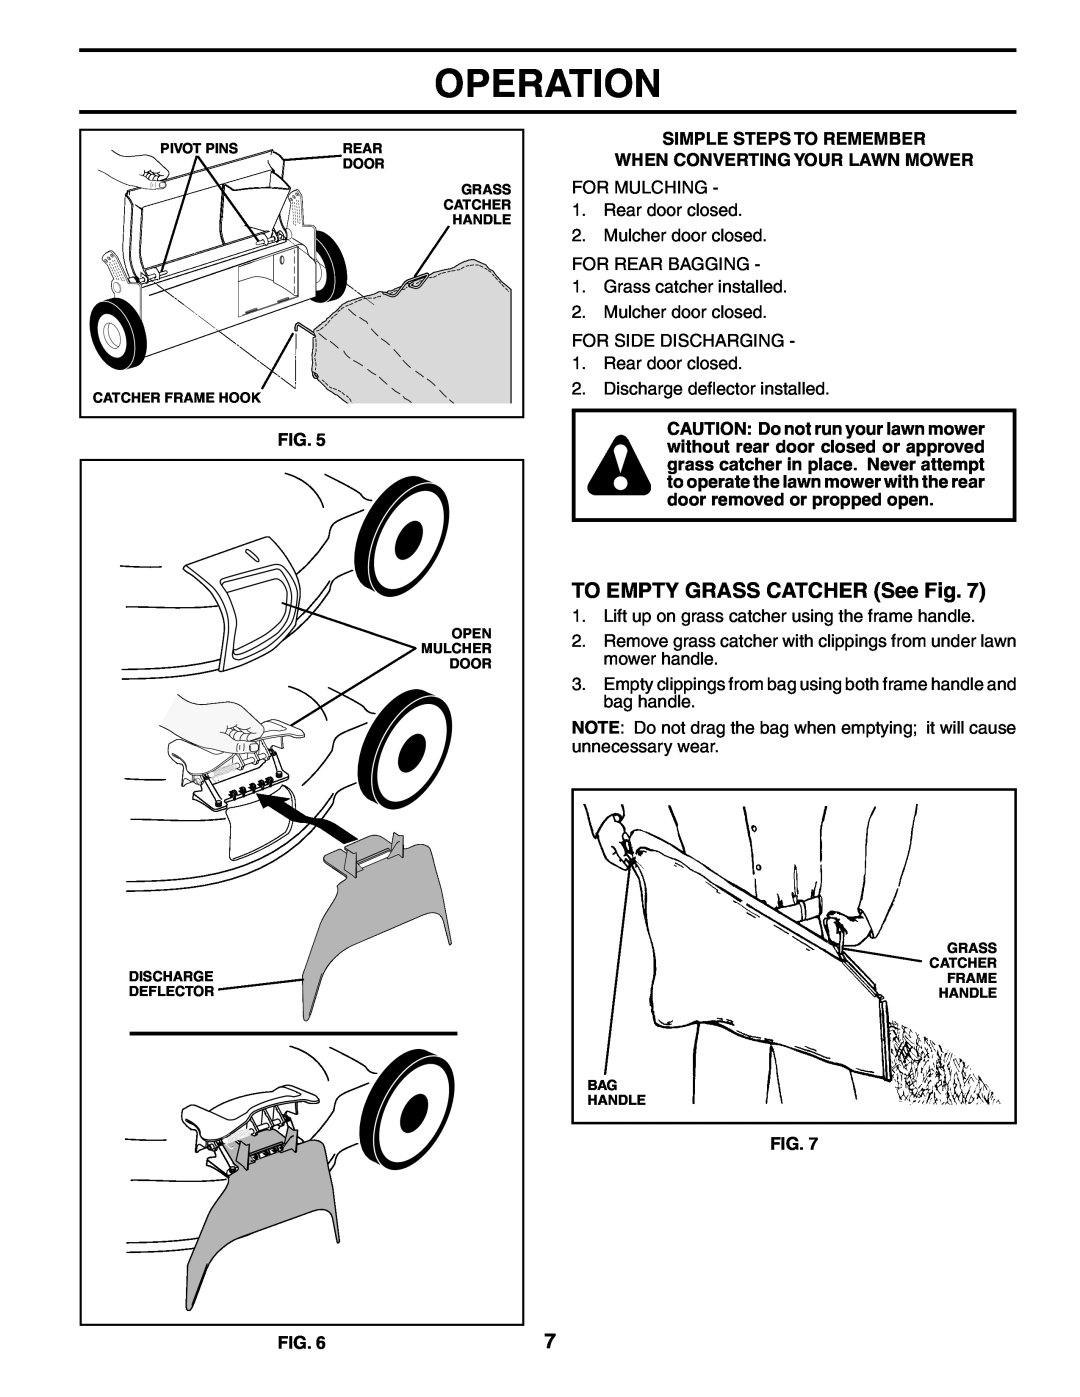 Husqvarna 5521CHV TO EMPTY GRASS CATCHER See Fig, Simple Steps To Remember When Converting Your Lawn Mower, Operation 